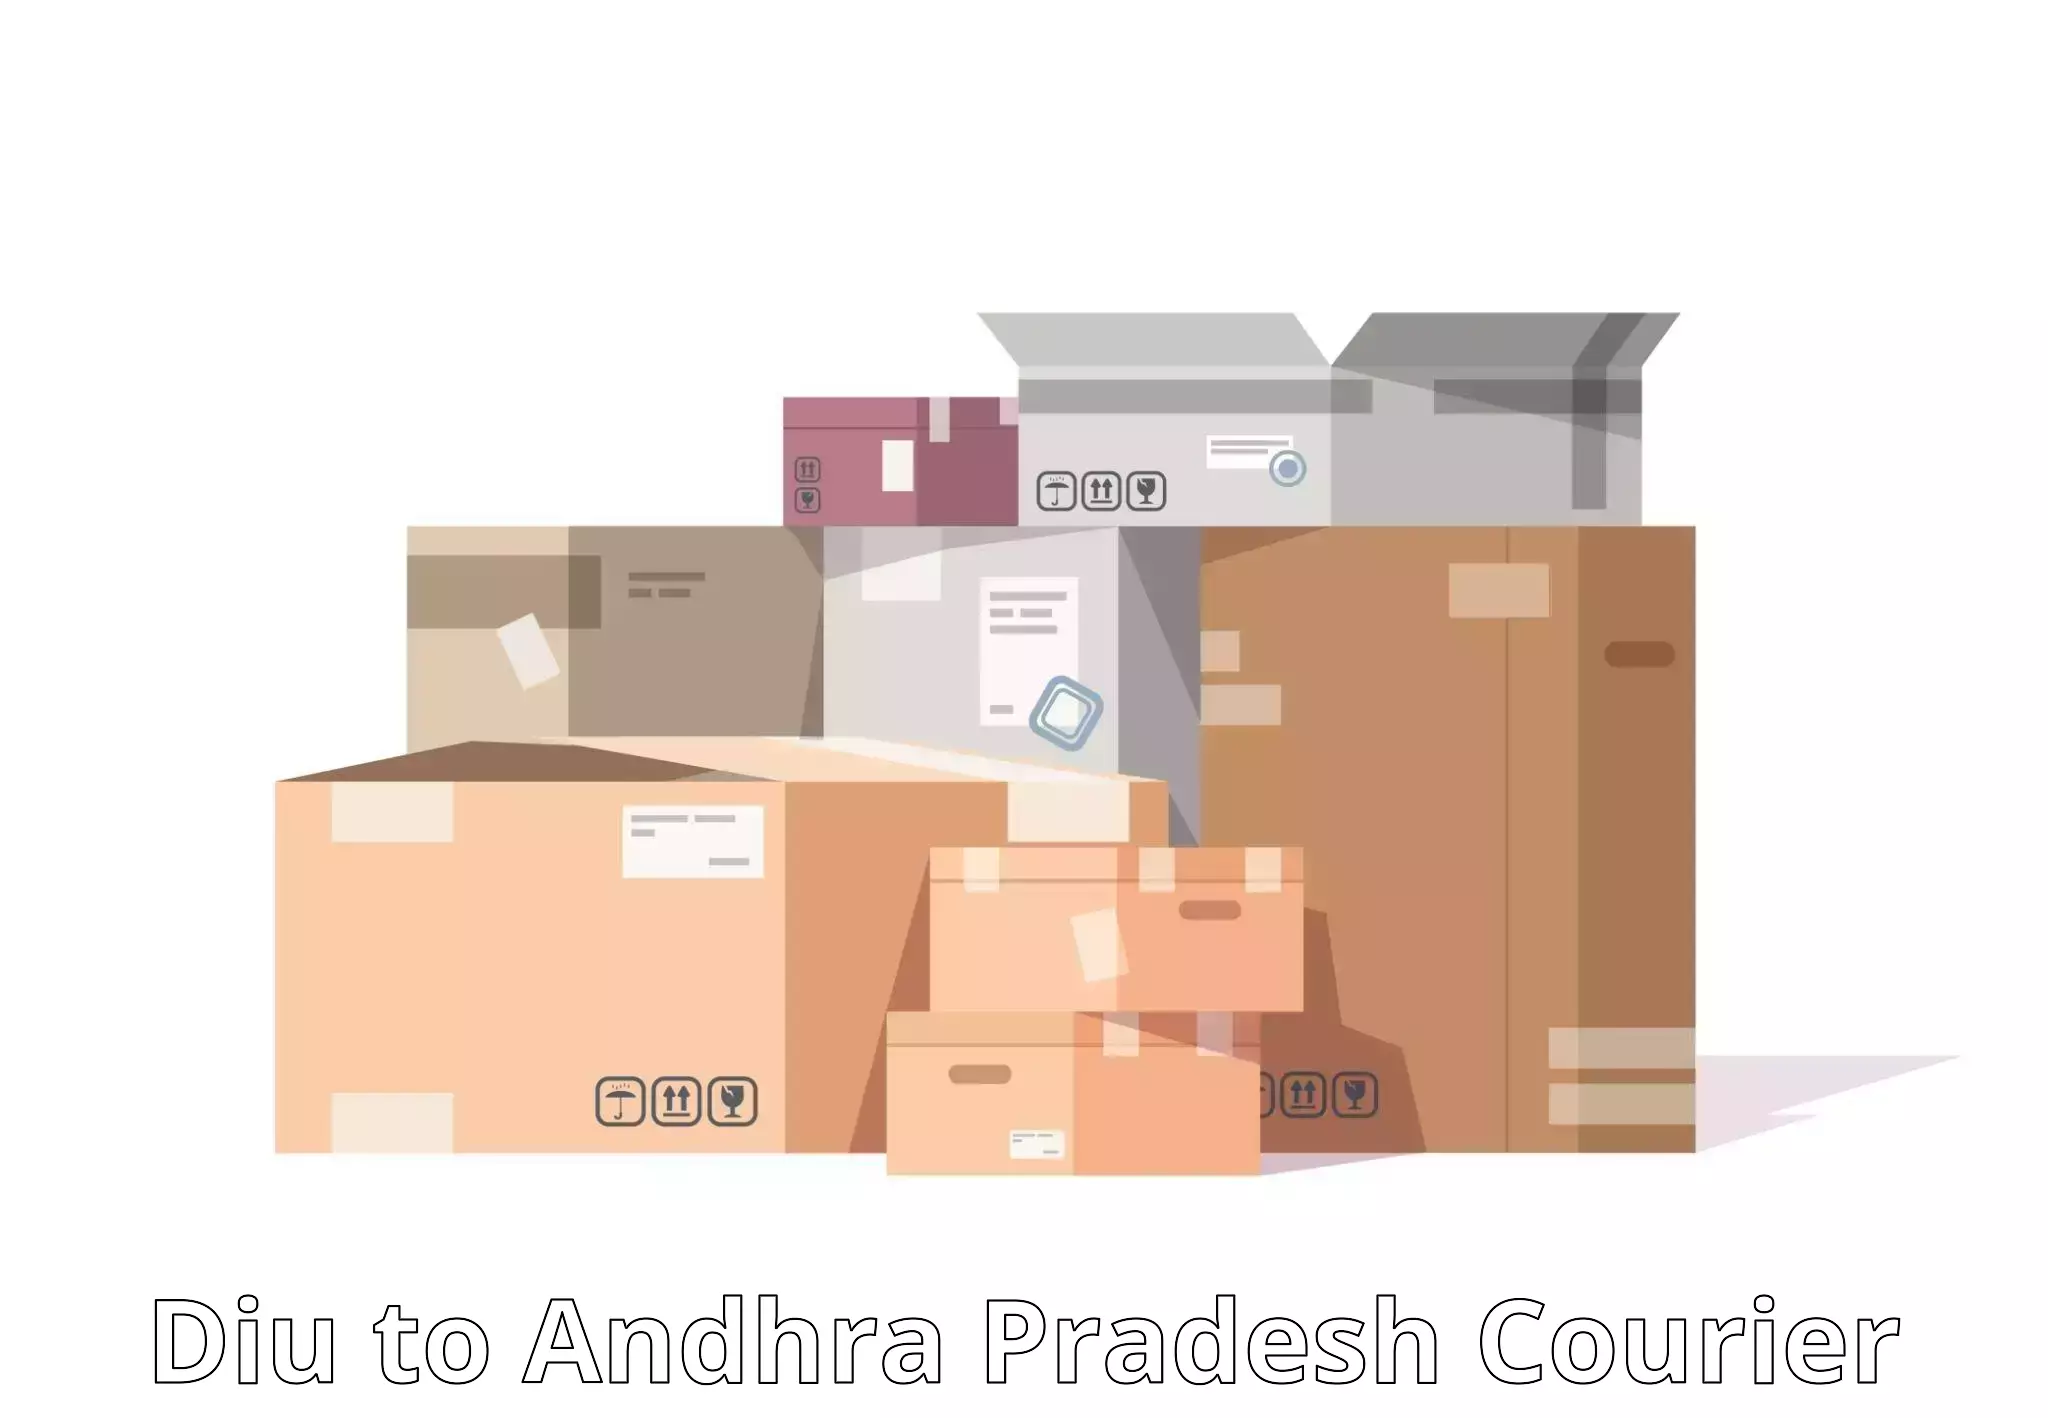 Courier service partnerships Diu to Gopalapatnam